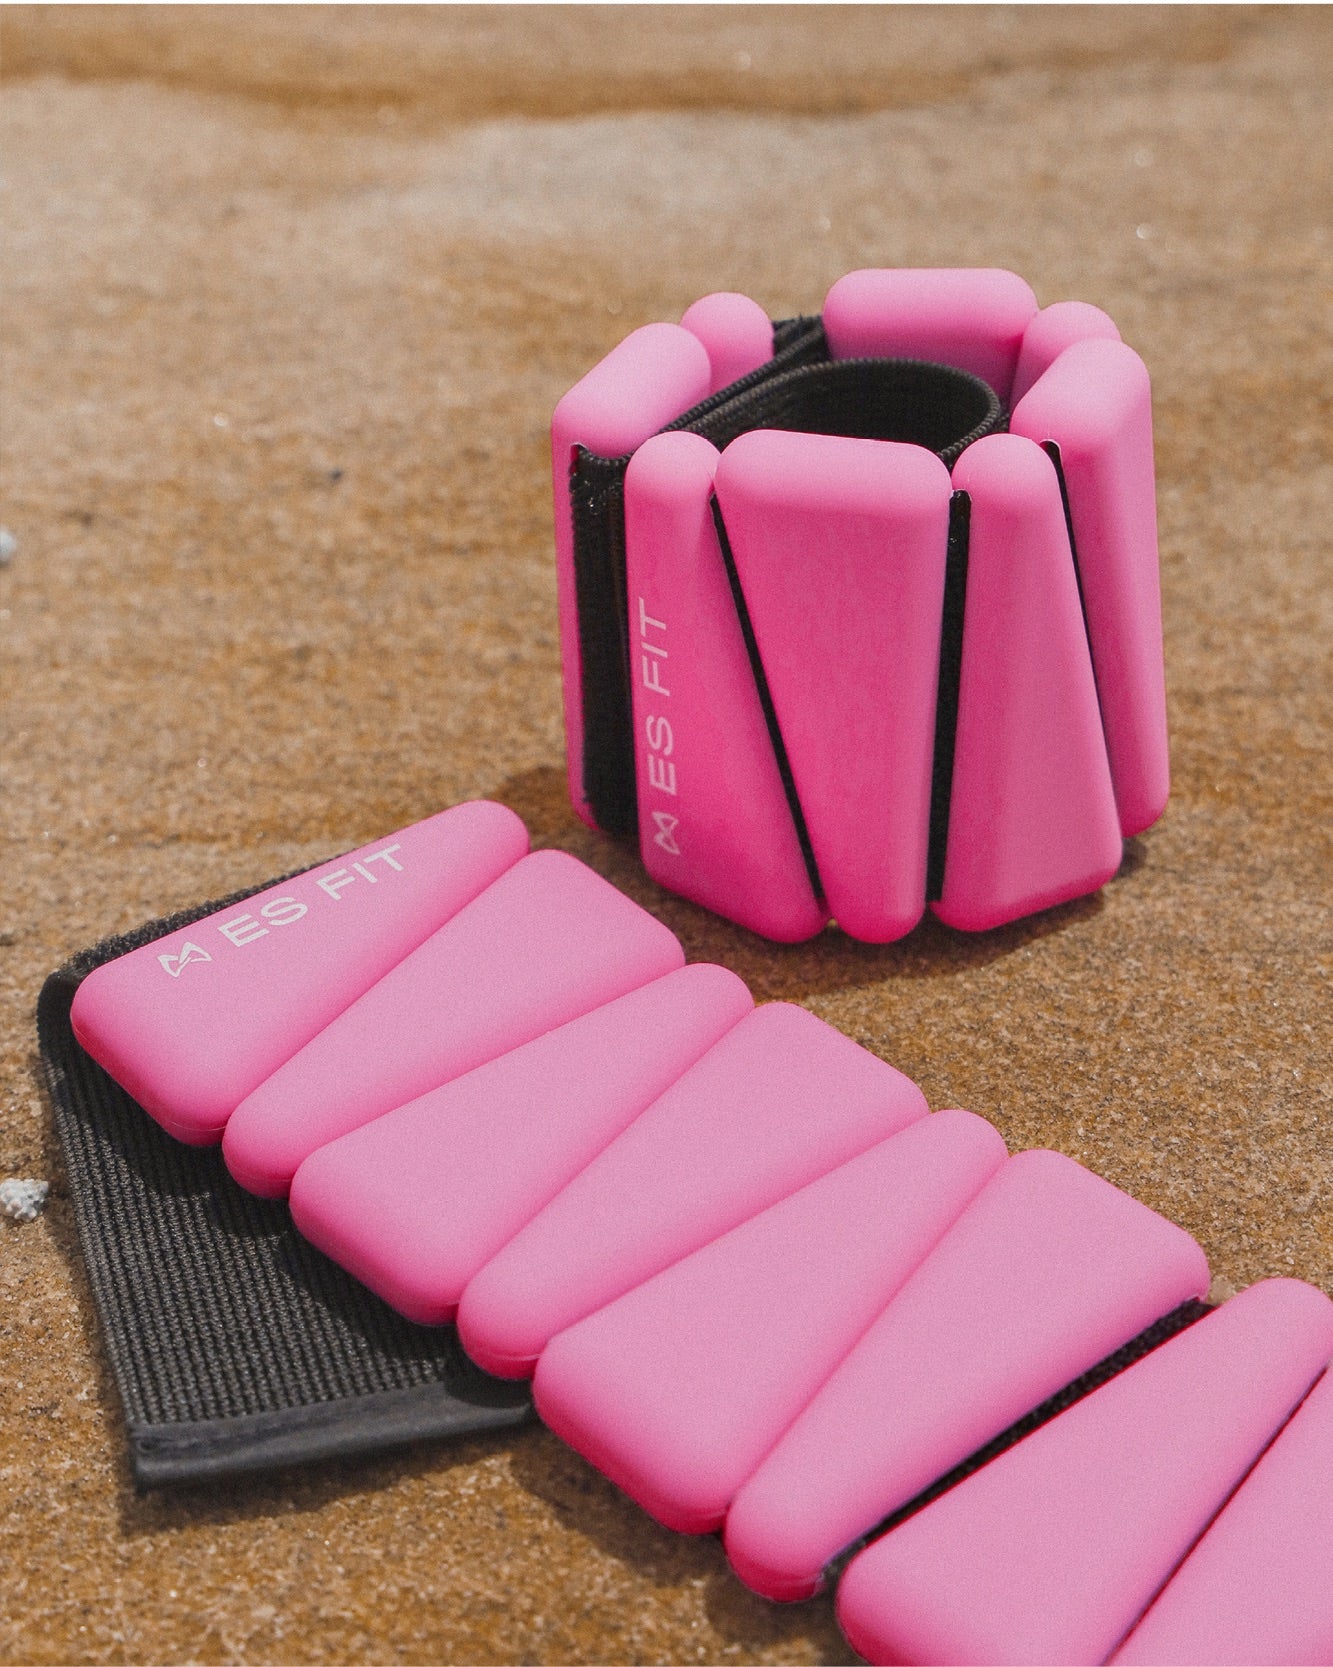 Adjustable & versatile Australian Ankle Weights & Wrist Weights. Use for a variety of benefits & workout exercises. Great for walking, pilates, toning + more. pink weight.